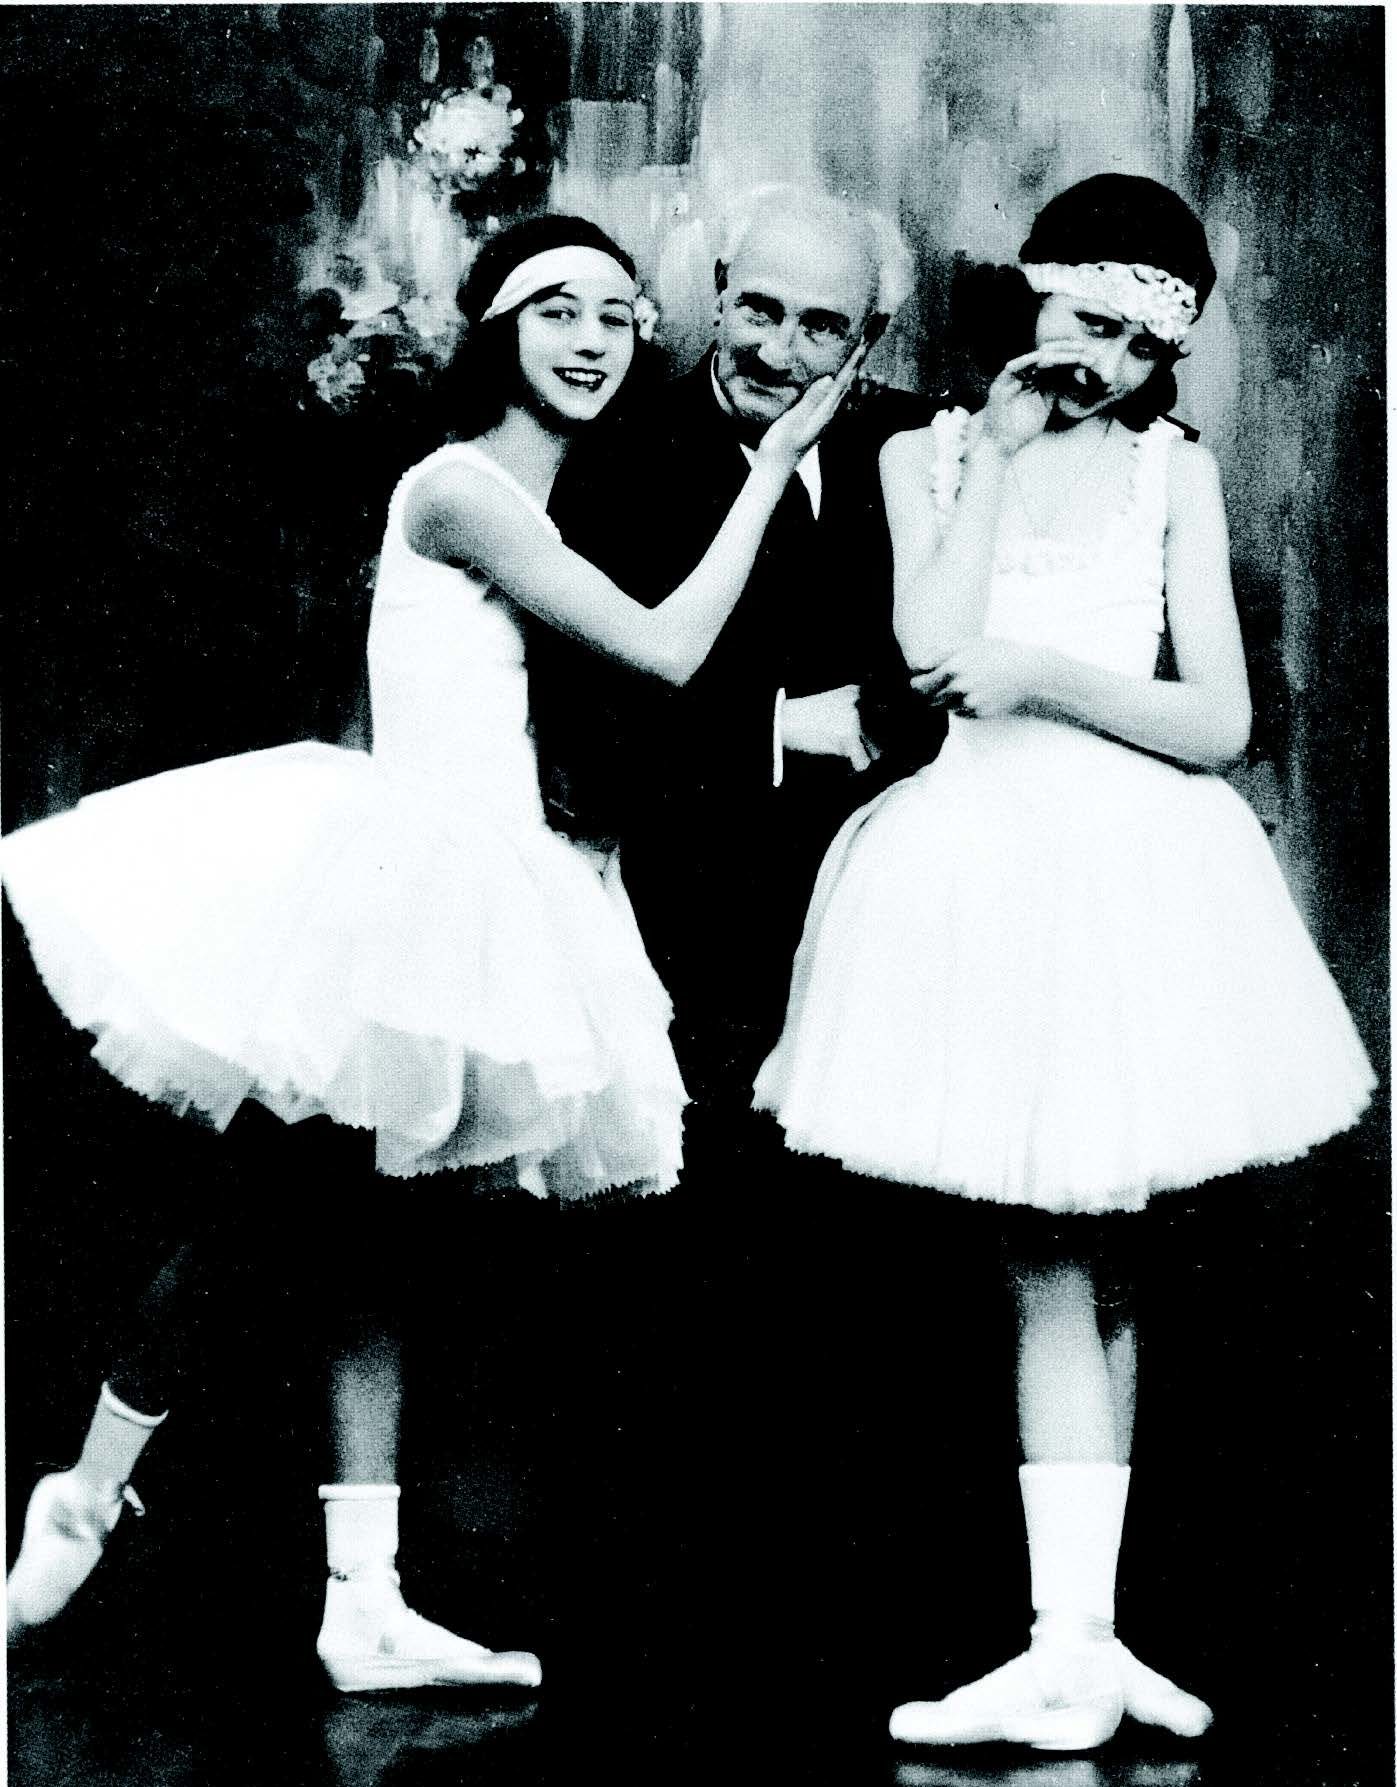 Smiling and posing for a picture, two ballerinas in tutus stand on either side of a man in a suit.